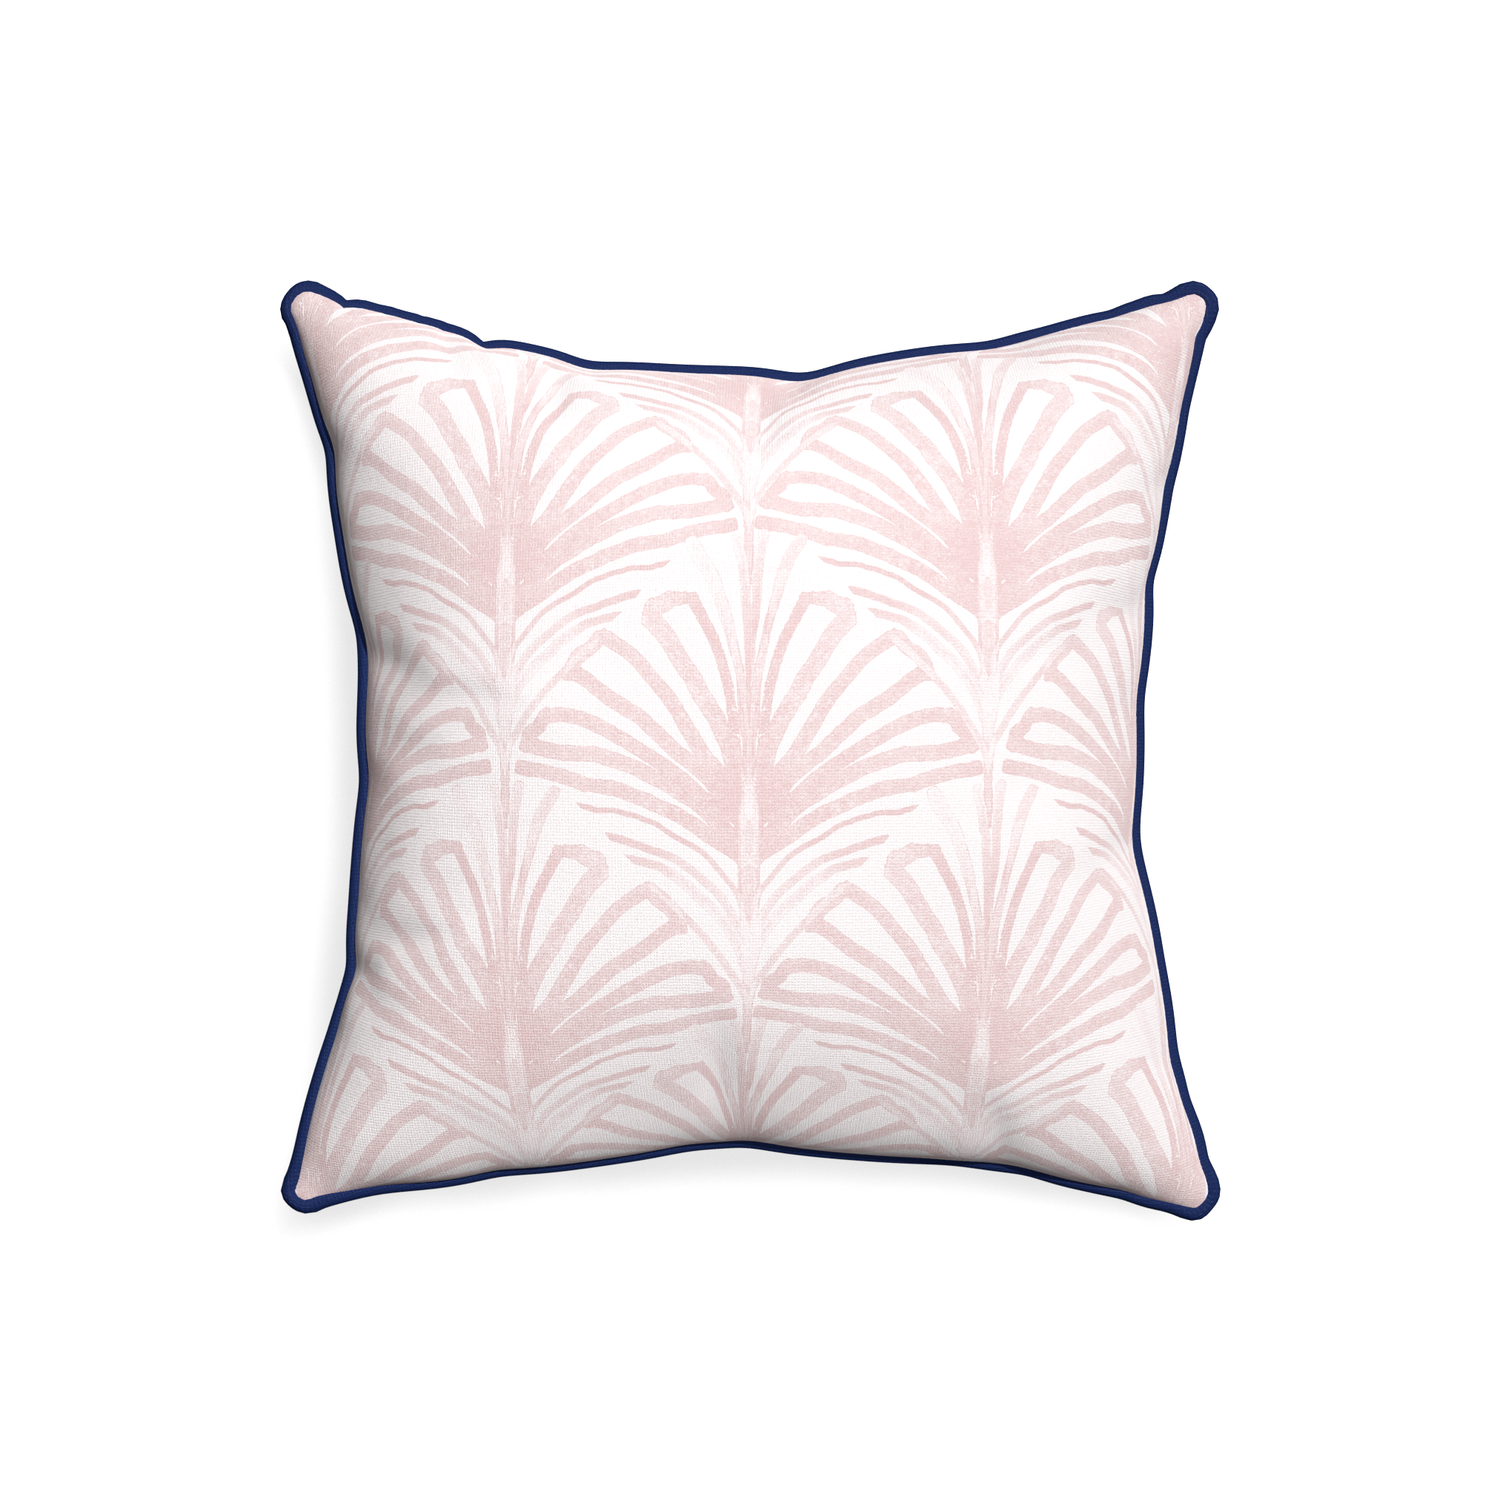 20-square suzy rose custom pillow with midnight piping on white background